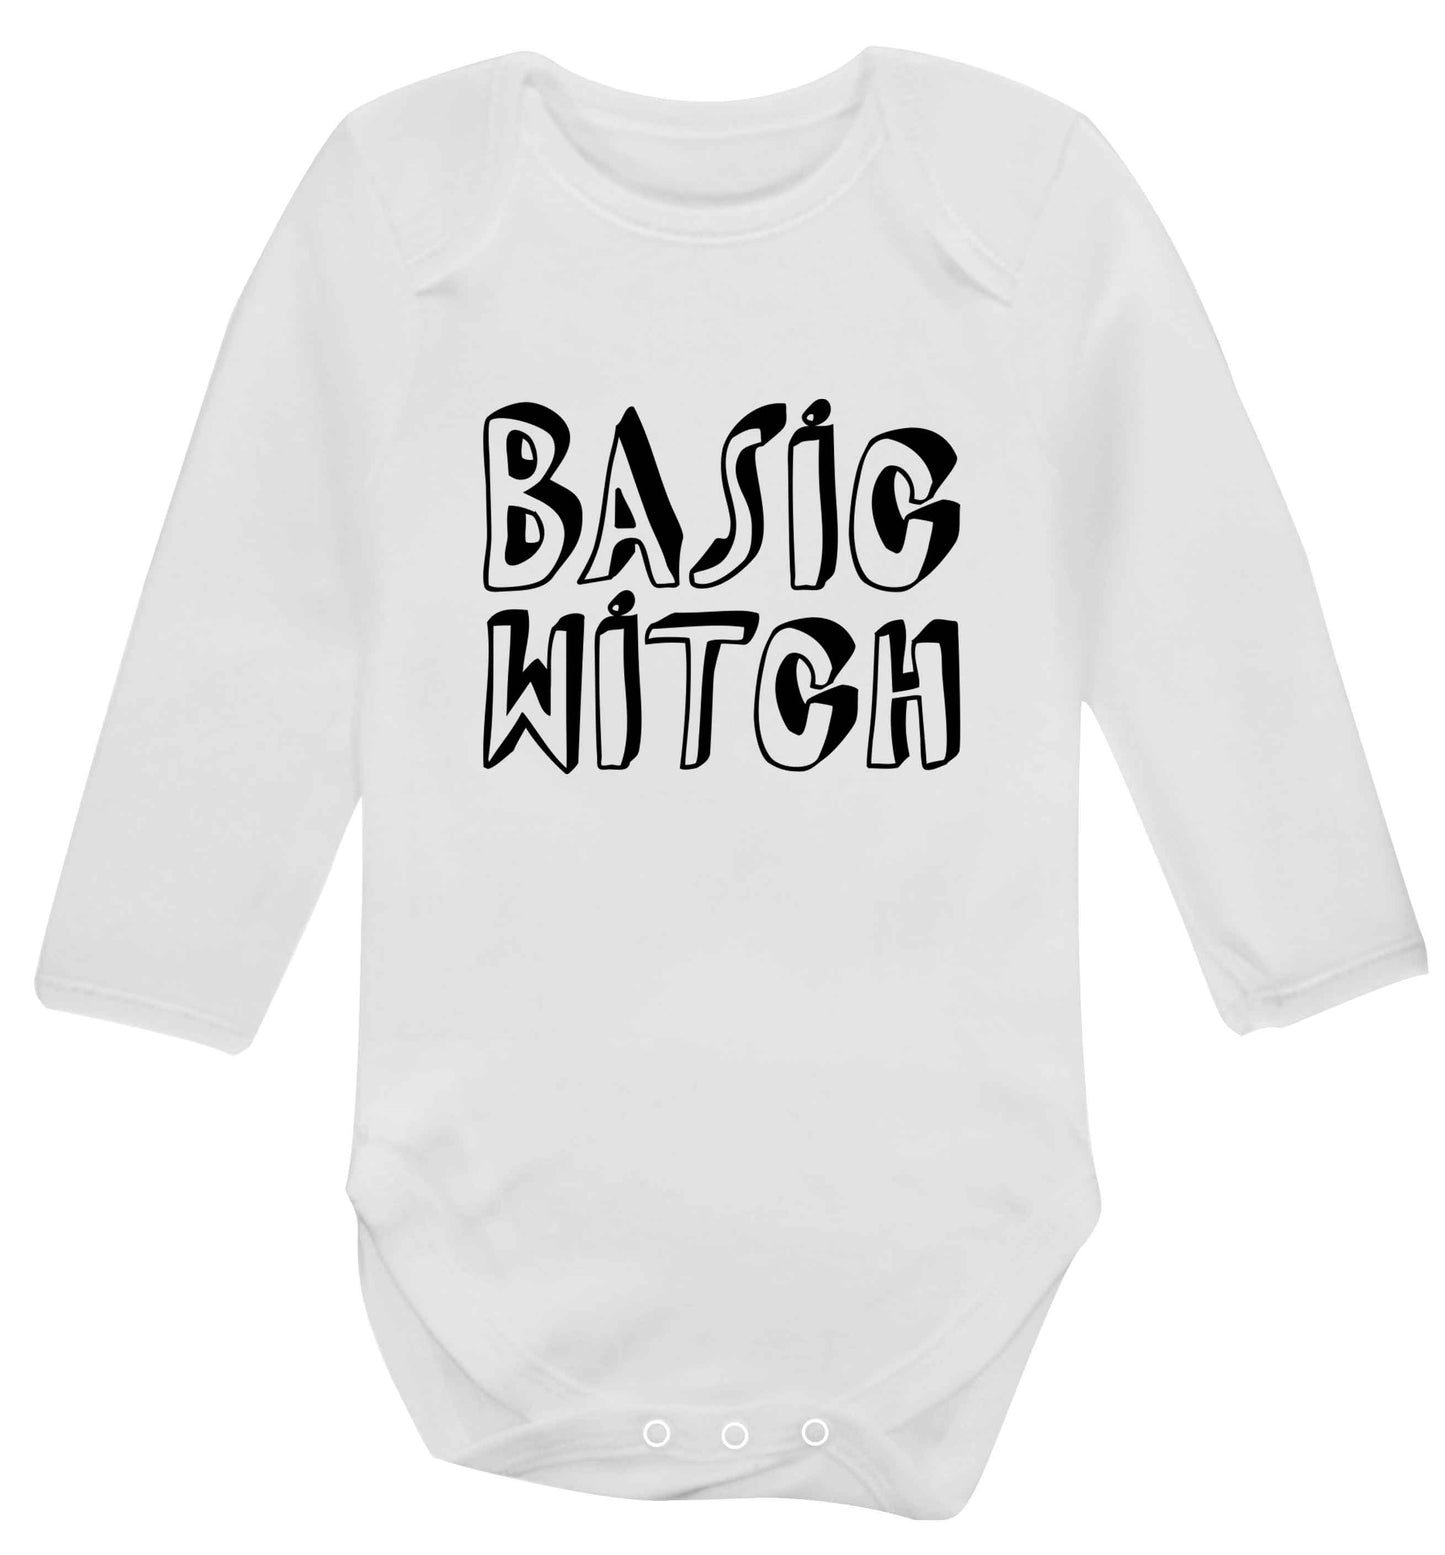 Basic witch baby vest long sleeved white 6-12 months